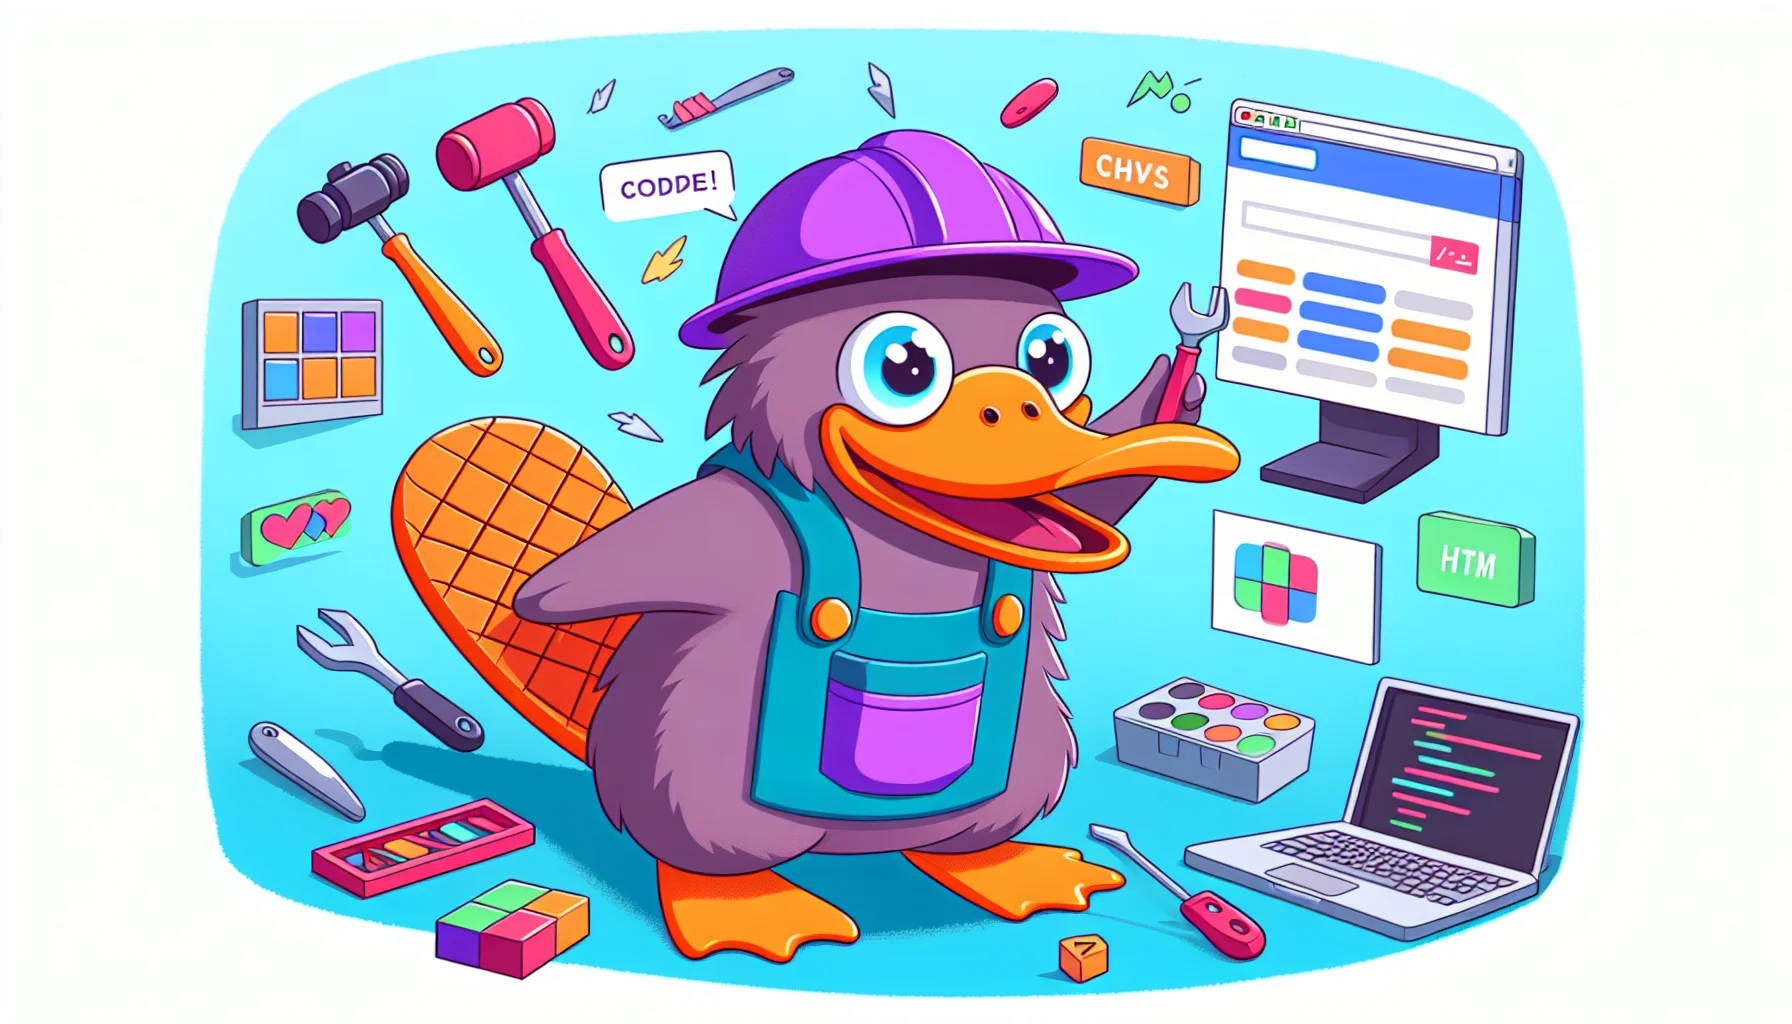 Illustrate a humorous scenario where an anthropomorphized platypus, as a metaphorical representation of a web building tool, is enthusiastically constructing a colorful website. The website is filled with a variety of fun symbols, like digital bricks and coding hammers. The platypus wears a violet worker's hat and a matching apron filled with tools like HTML tags, CSS palettes, and JavaScript wrenches. Showcase it in such a way that it appears engaging and appealing to web hosting enthusiasts.